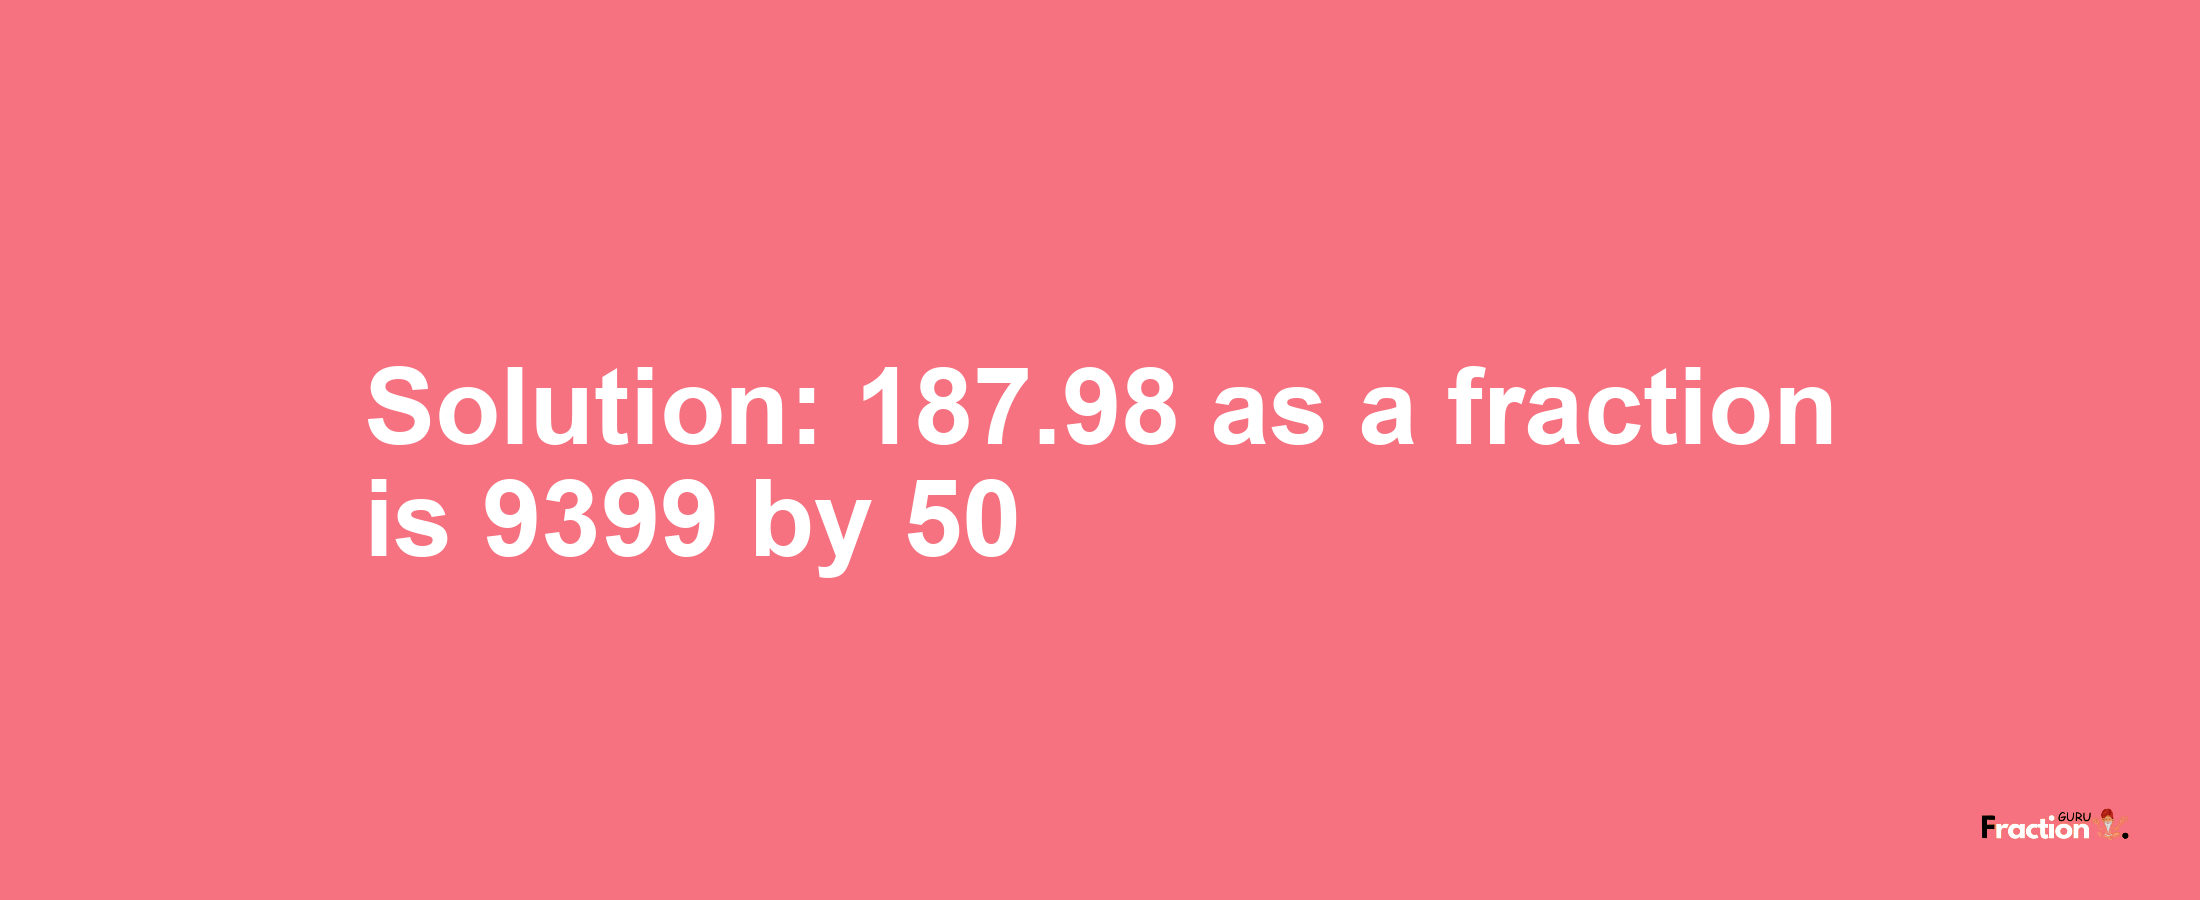 Solution:187.98 as a fraction is 9399/50